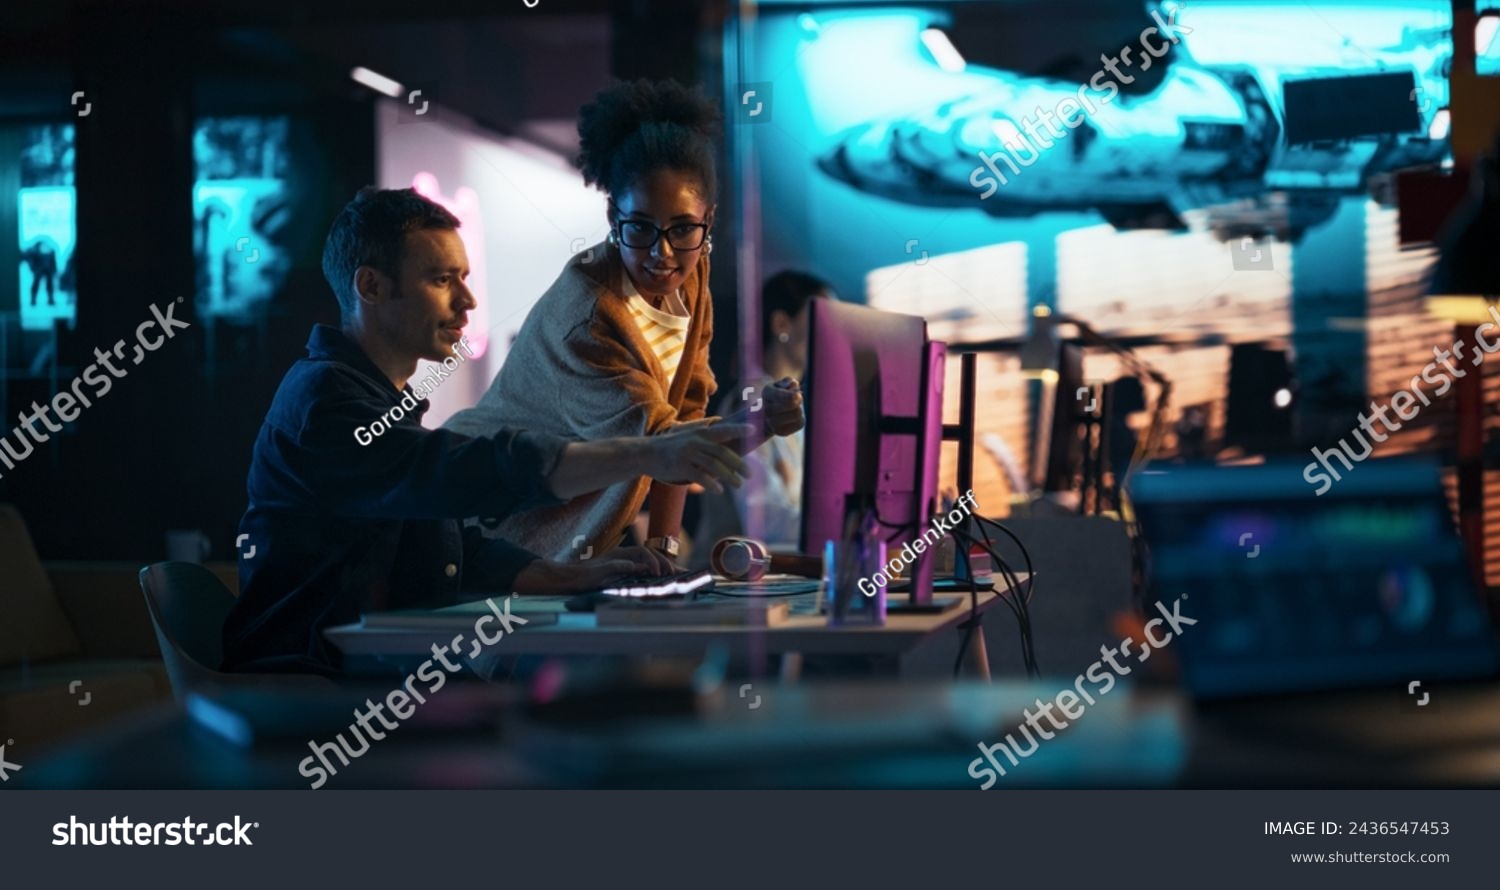 Portrait of Black Creative Director Giving Instructions on 3D Game Visuals to Male Developer in Creative Agency. Two Stylish Diverse Employees Discussing Design on Computer in Game Development Company #2436547453